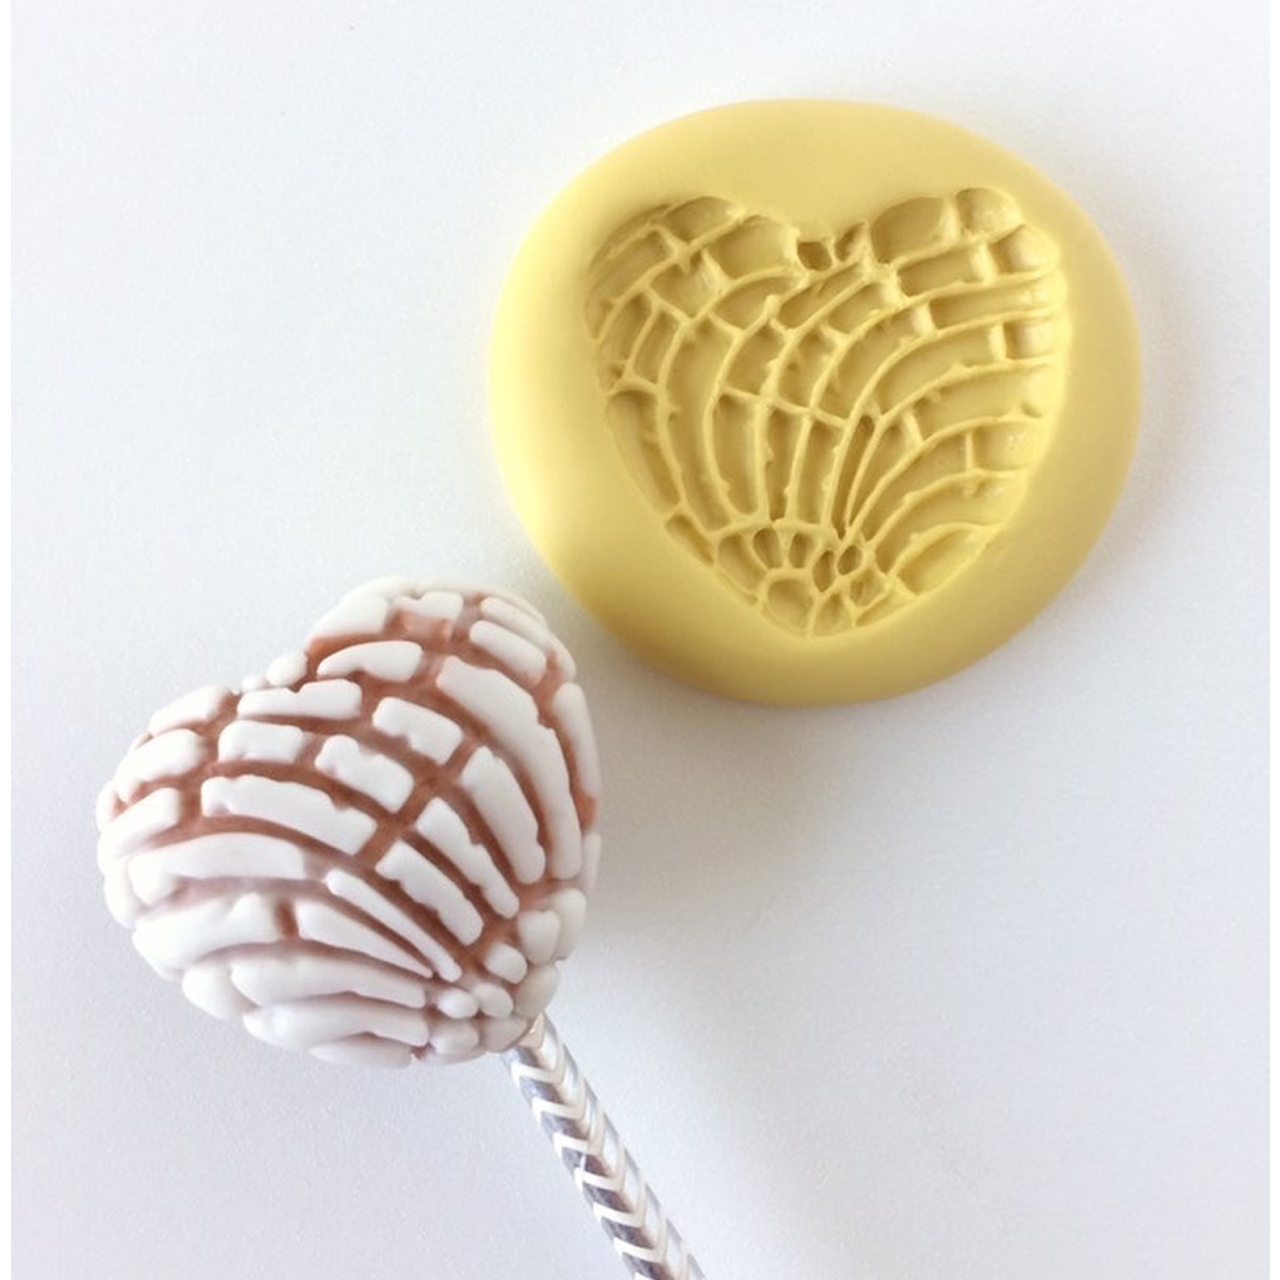 My Little Cakepop's new tall heart cake pop mold and adorable convers, Cake Pops